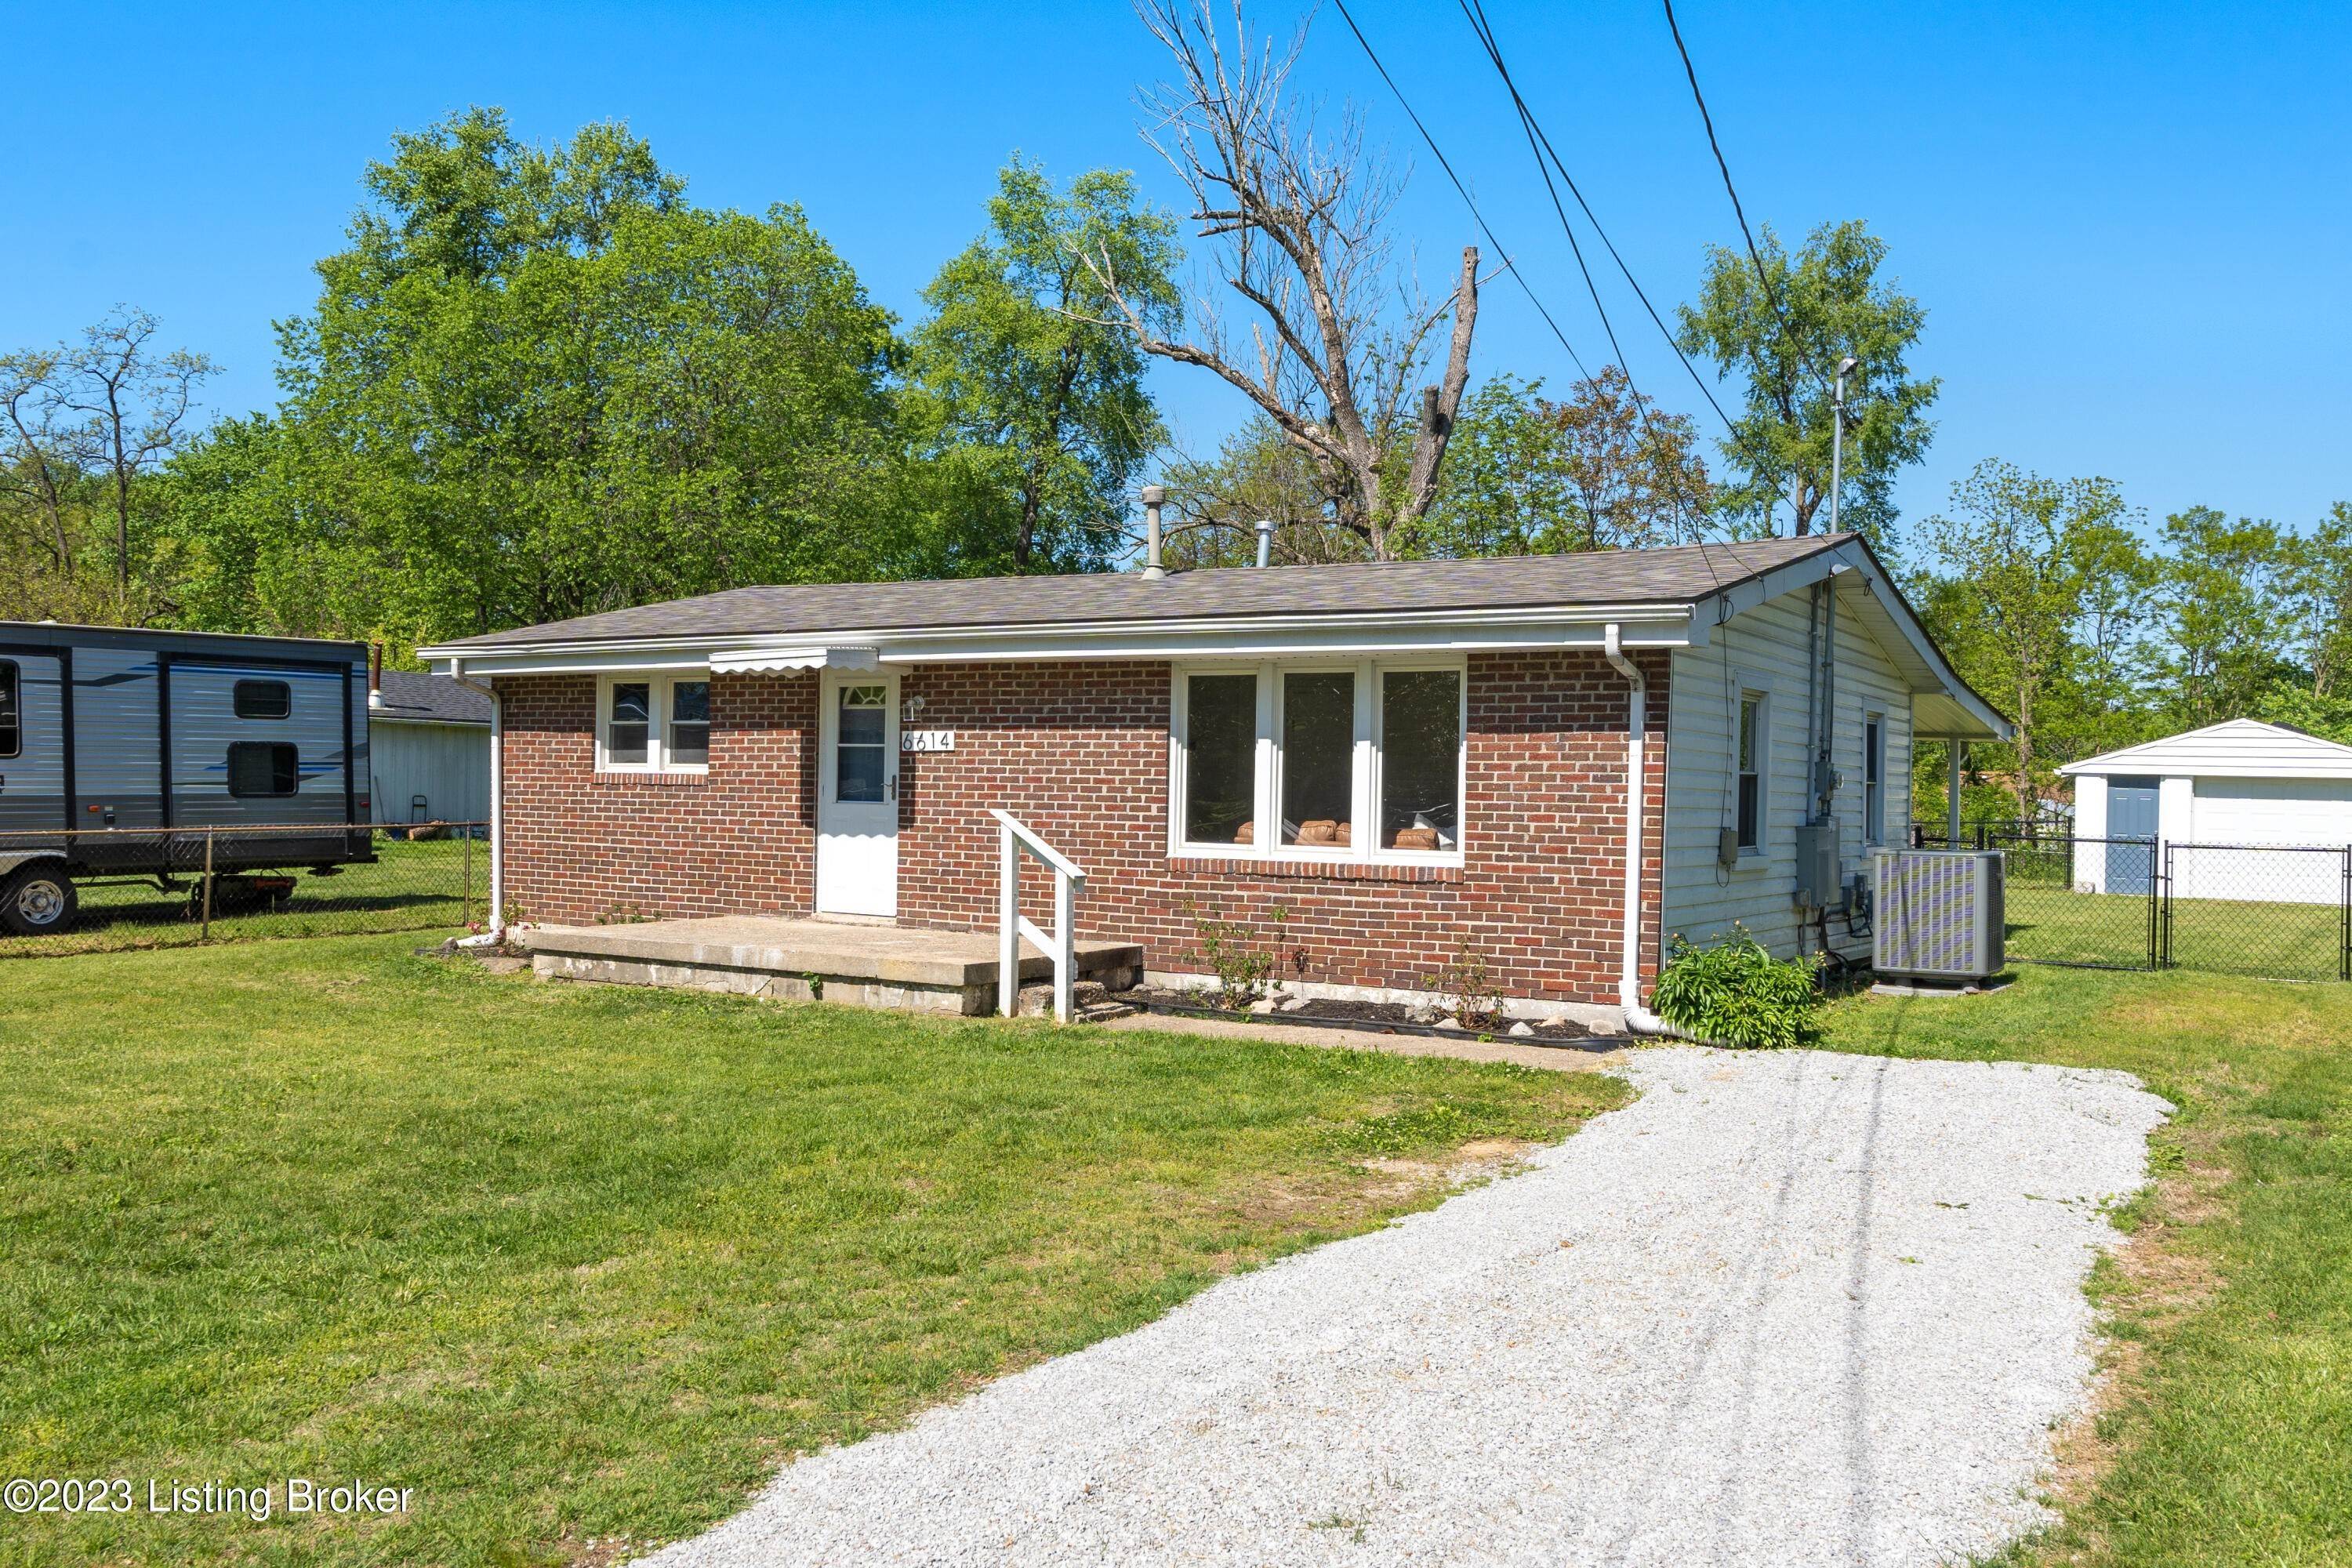 2. Single Family at Louisville, KY 40258